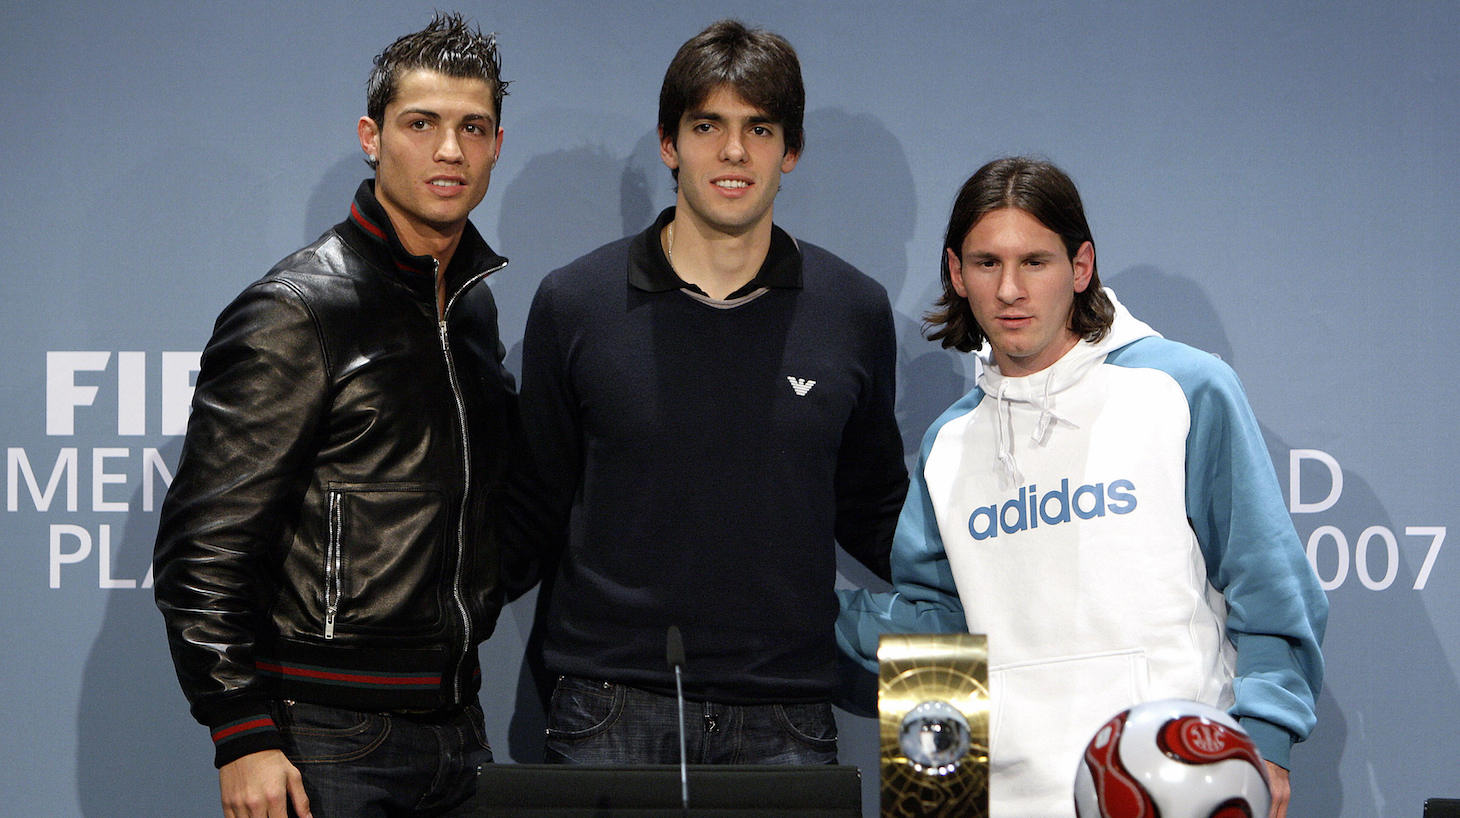 Football players, Portugal's Cristiano Ronaldo, Brazil's Kaka and Argentina's Lionel Messi pose during a press conference prior to the FIFA World Player Gala 2007 award ceremony 17 December 2007 in Zurich.